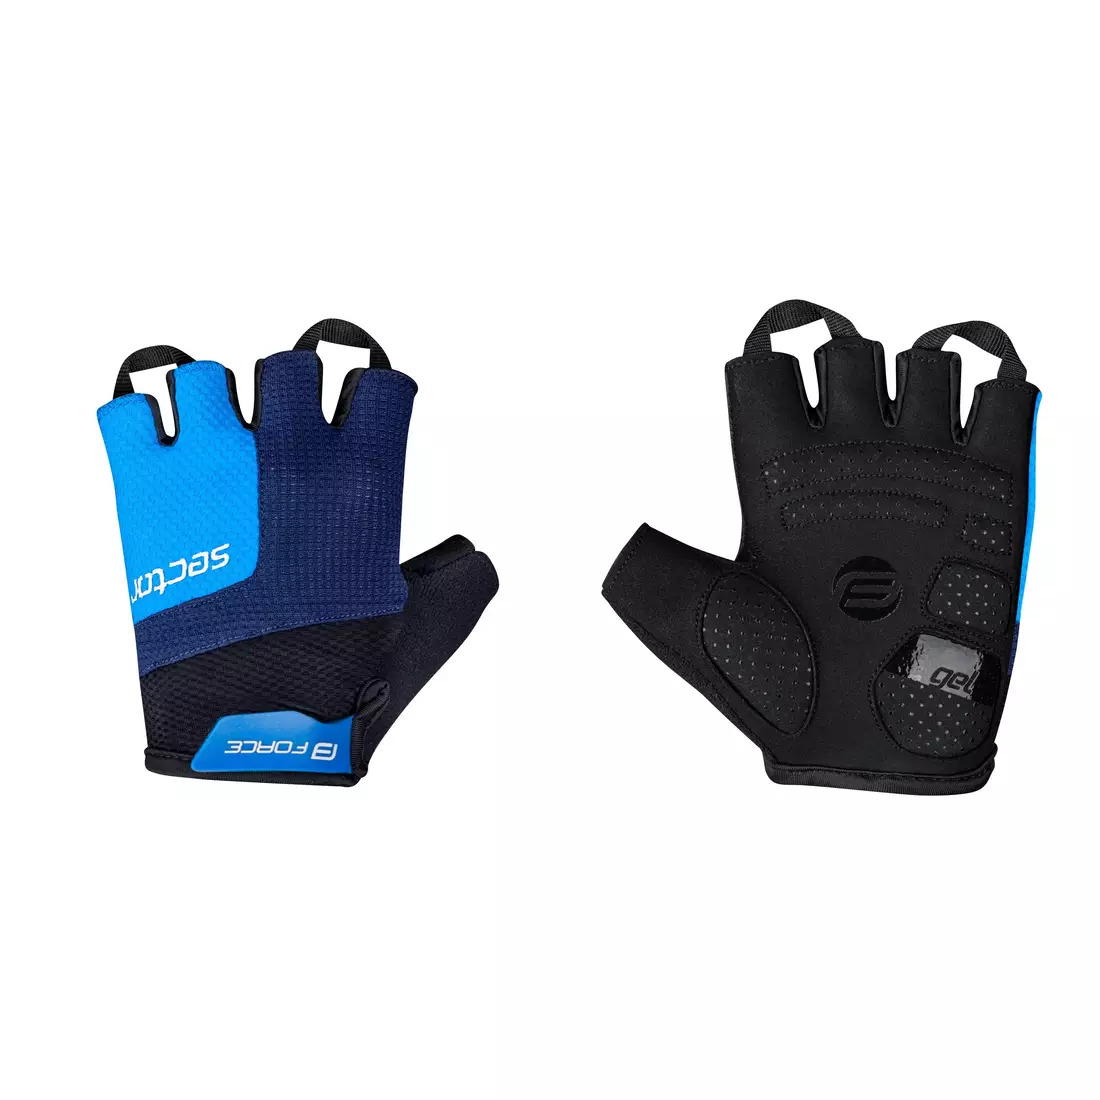 FORCE SECTOR cycling gloves unisex, black and blue